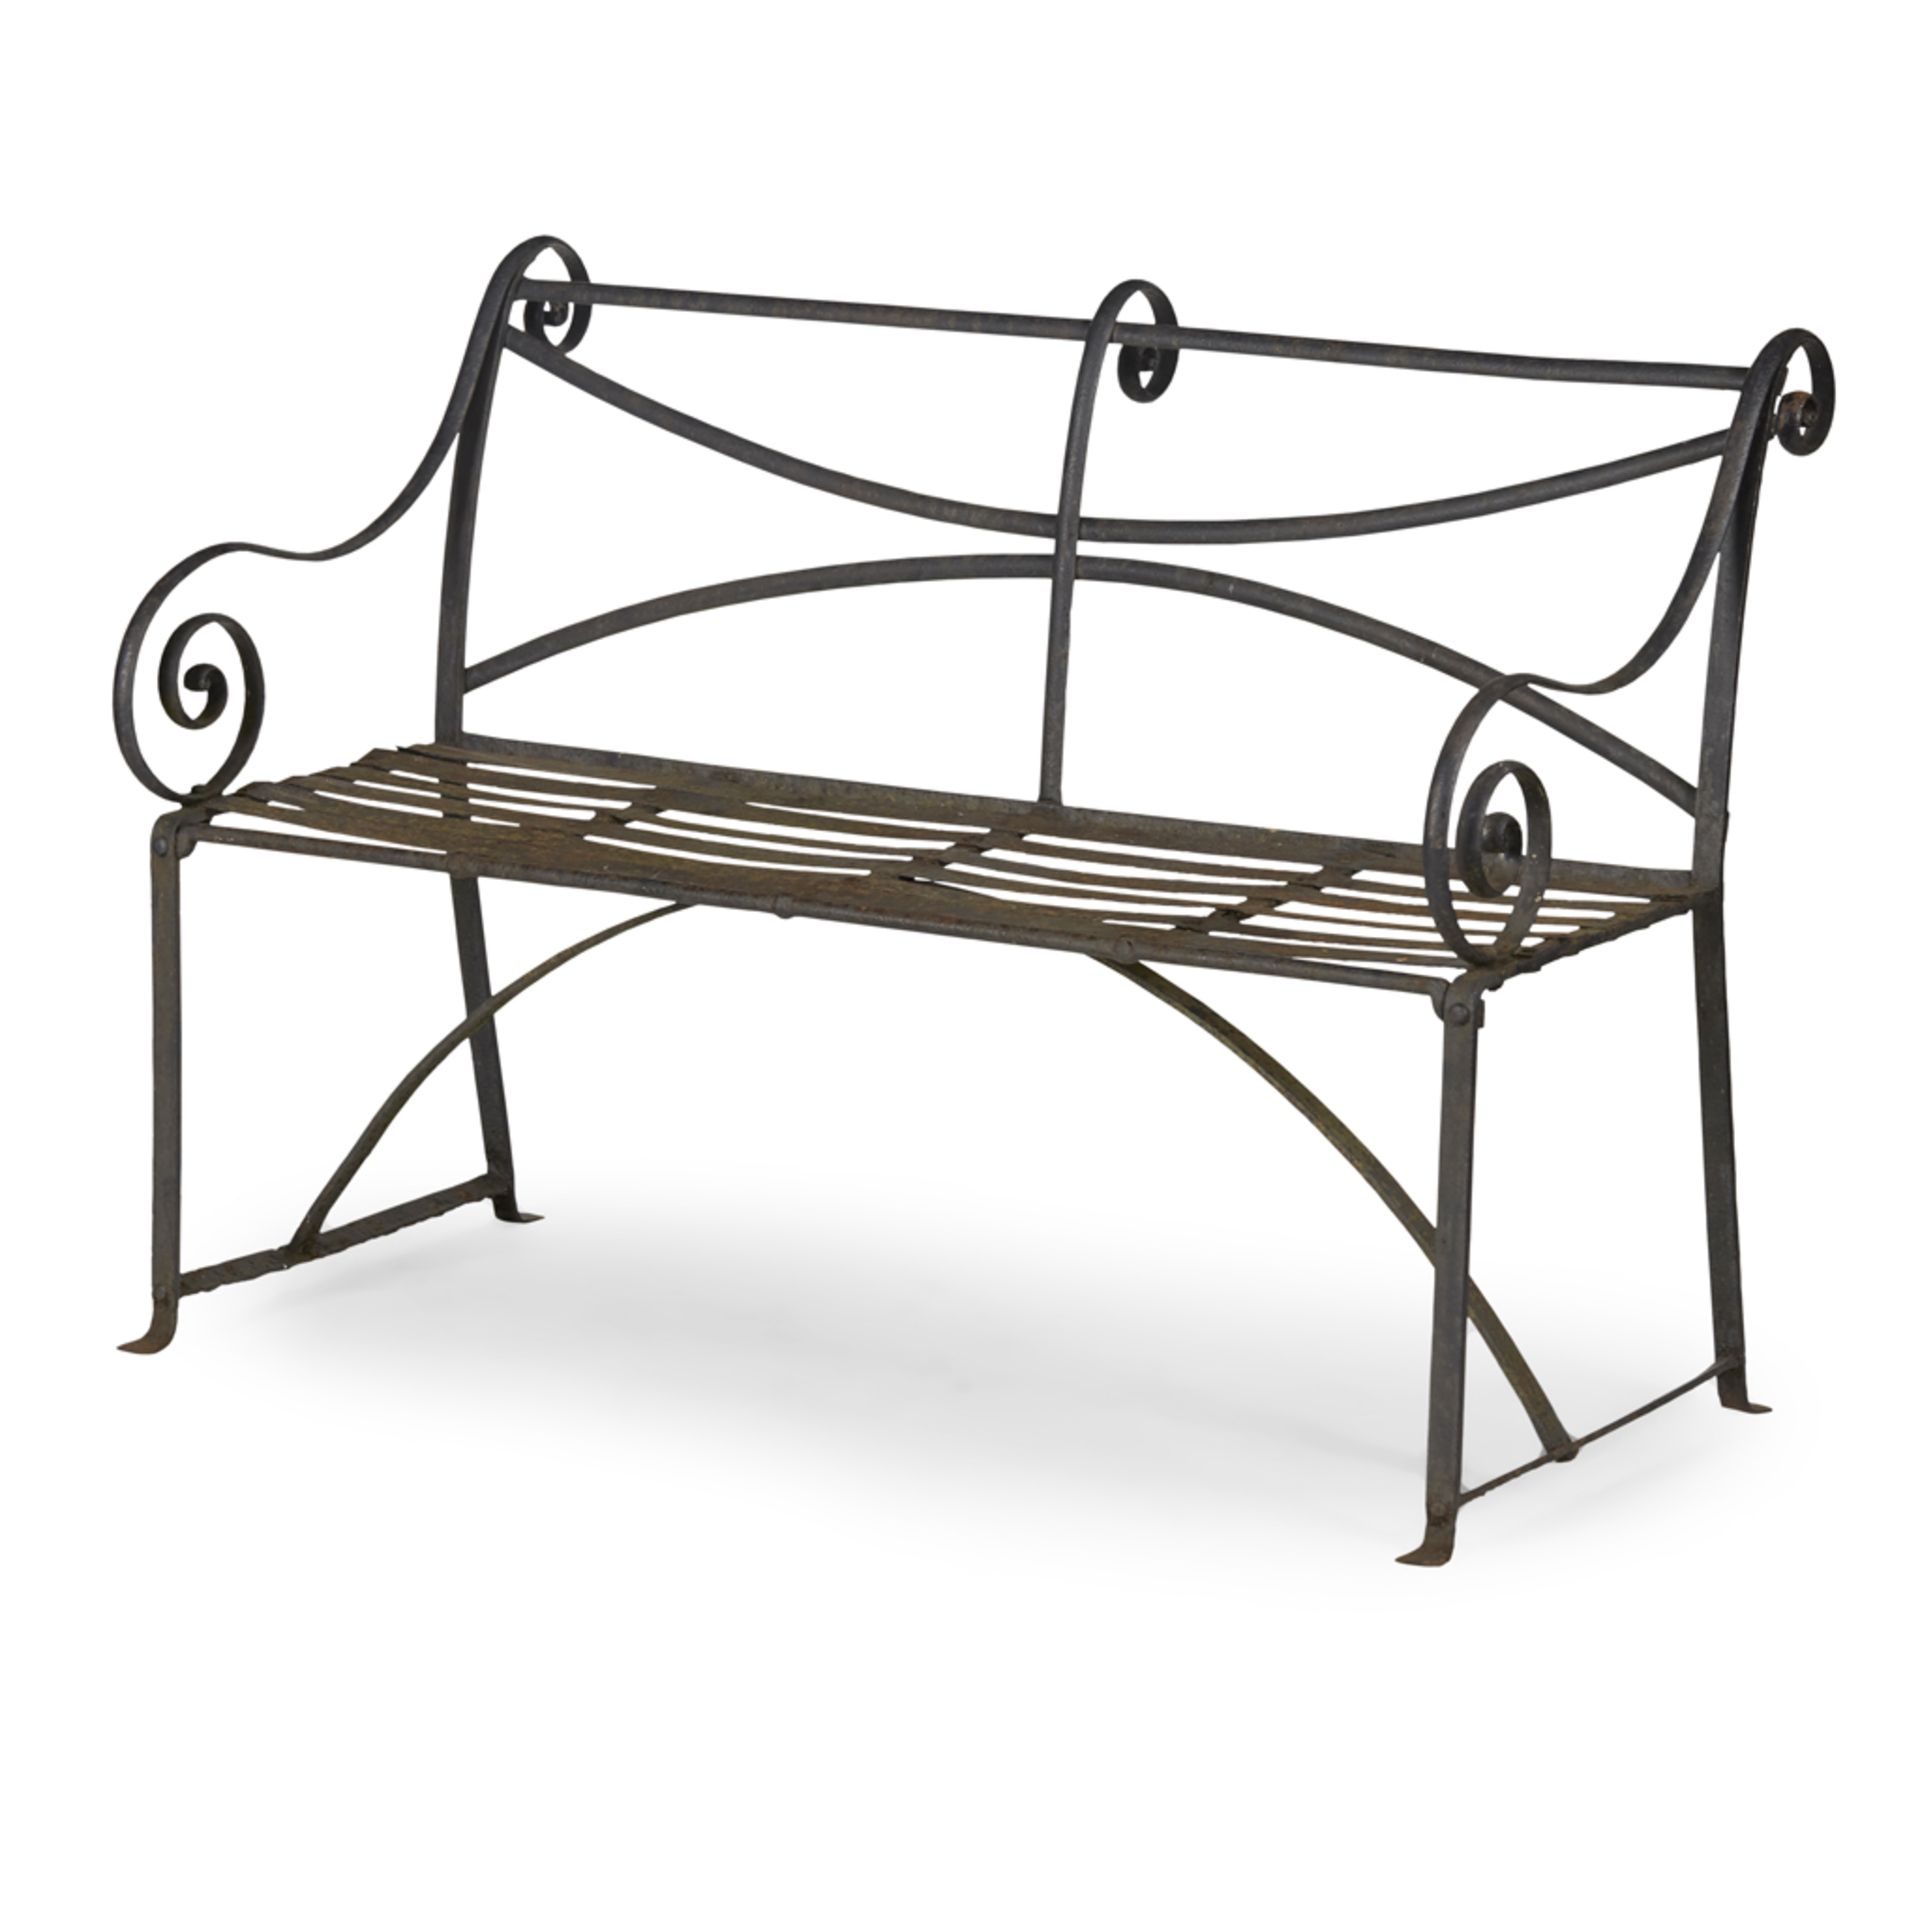 EARLY VICTORIAN WROUGHT IRON GARDEN BENCH EARLY 19TH CENTURY with scroll back and arms above a